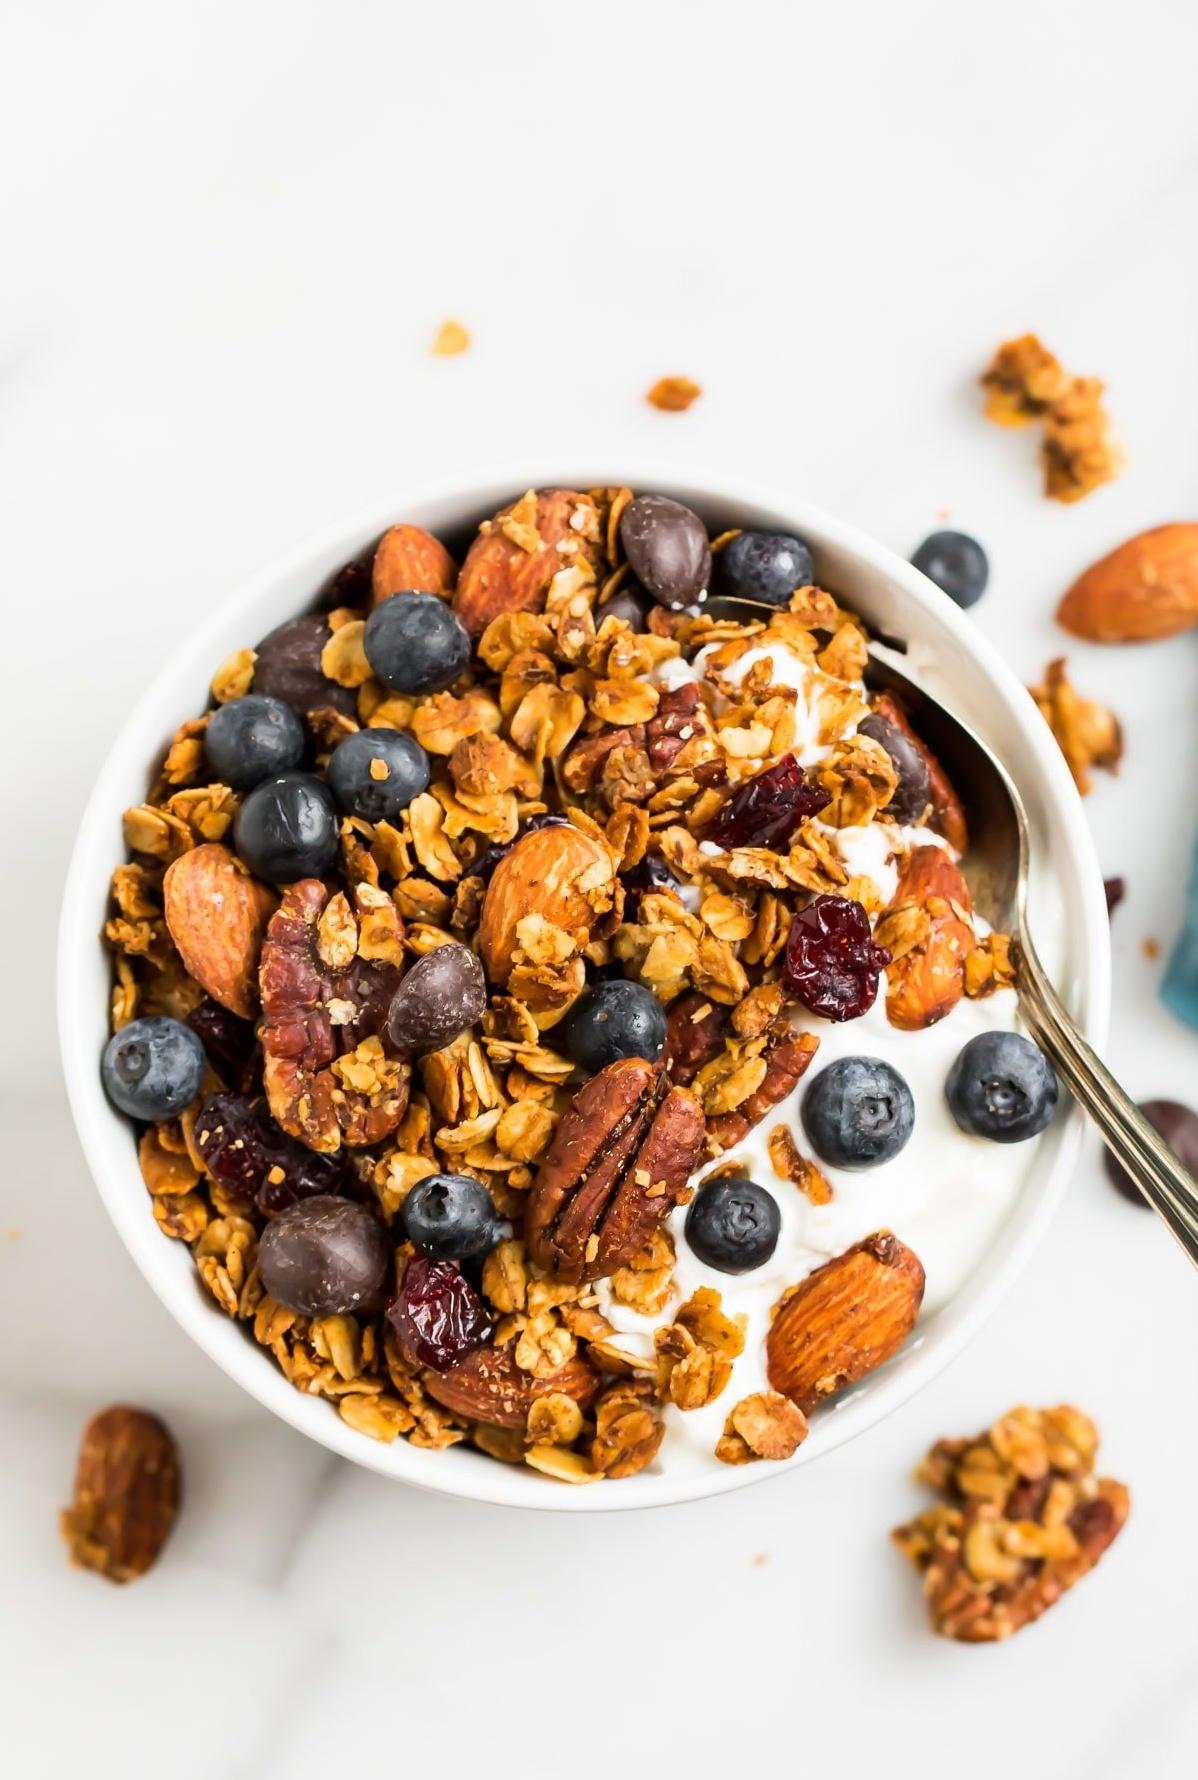  Get your daily dose of protein with a handful of this delicious and nutritious gluten-free granola.